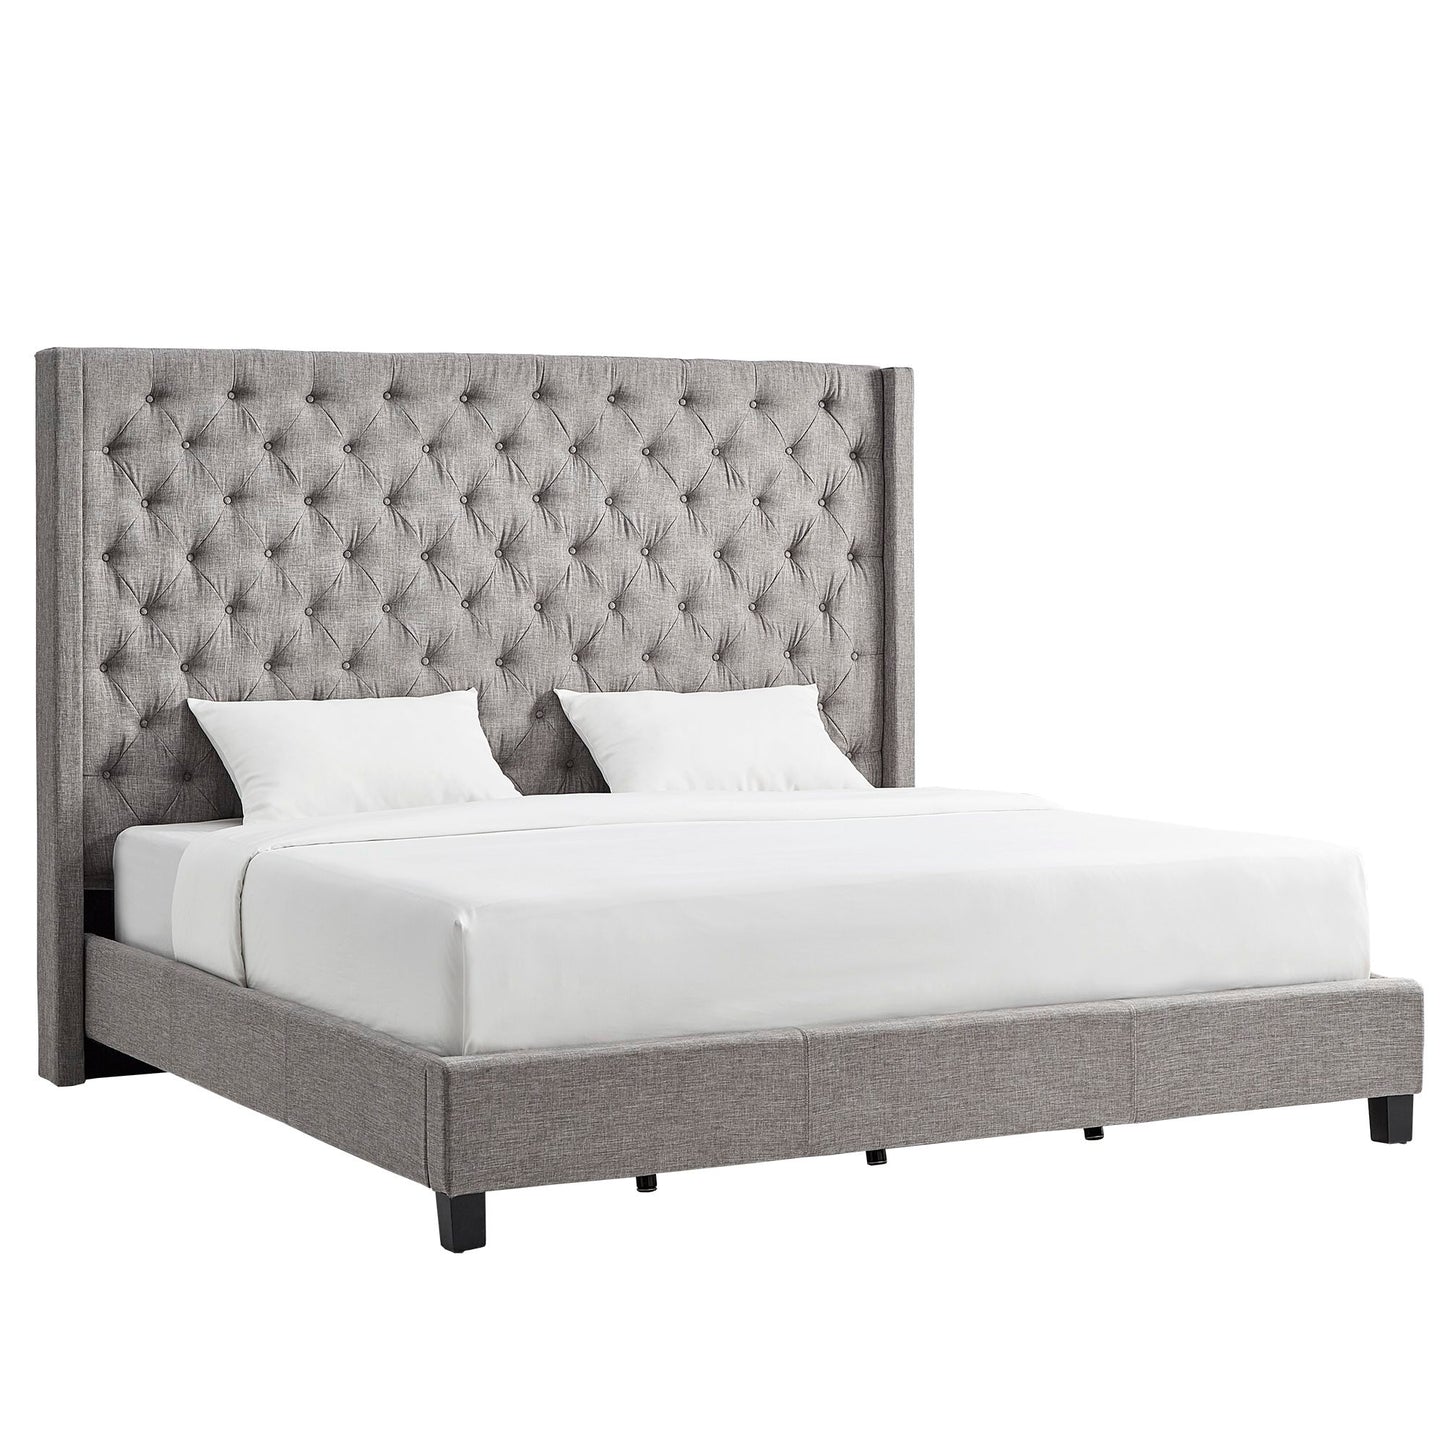 Wingback Button Tufted Tall Headboard Bed - Grey Linen, King